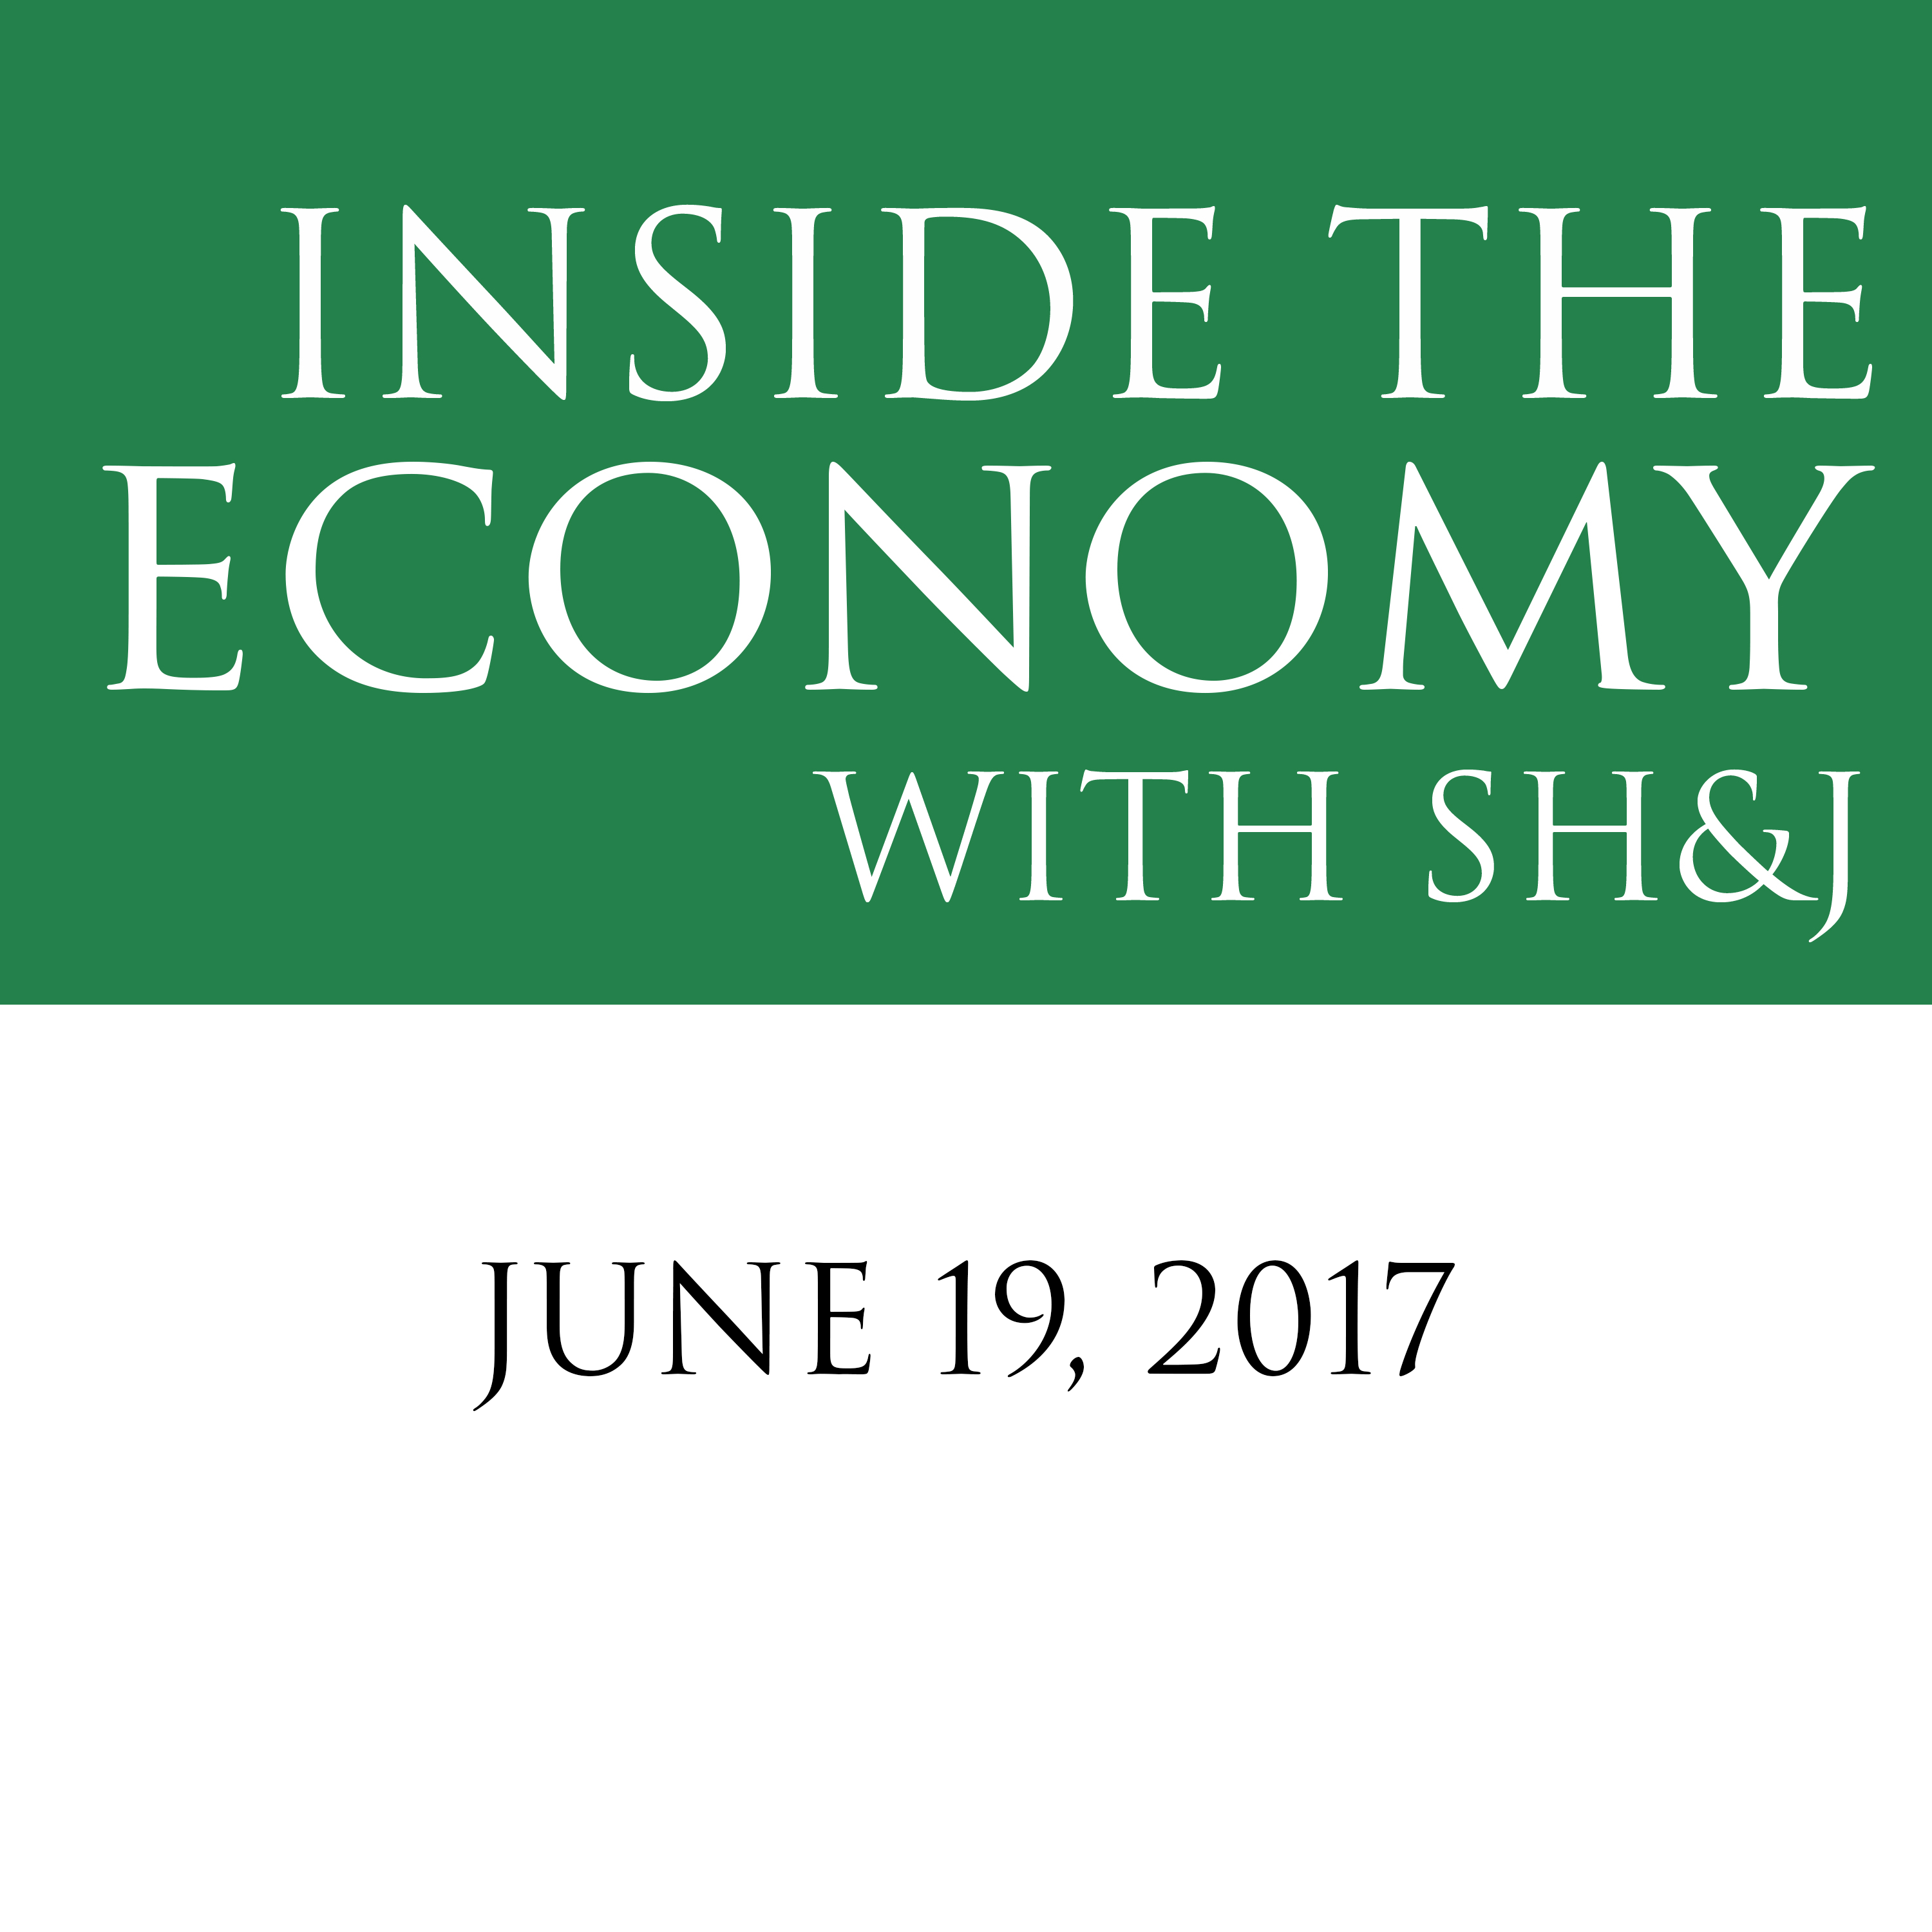 Inside the Economy with SH&J: High Inflation, Interest Rates and a Look Back